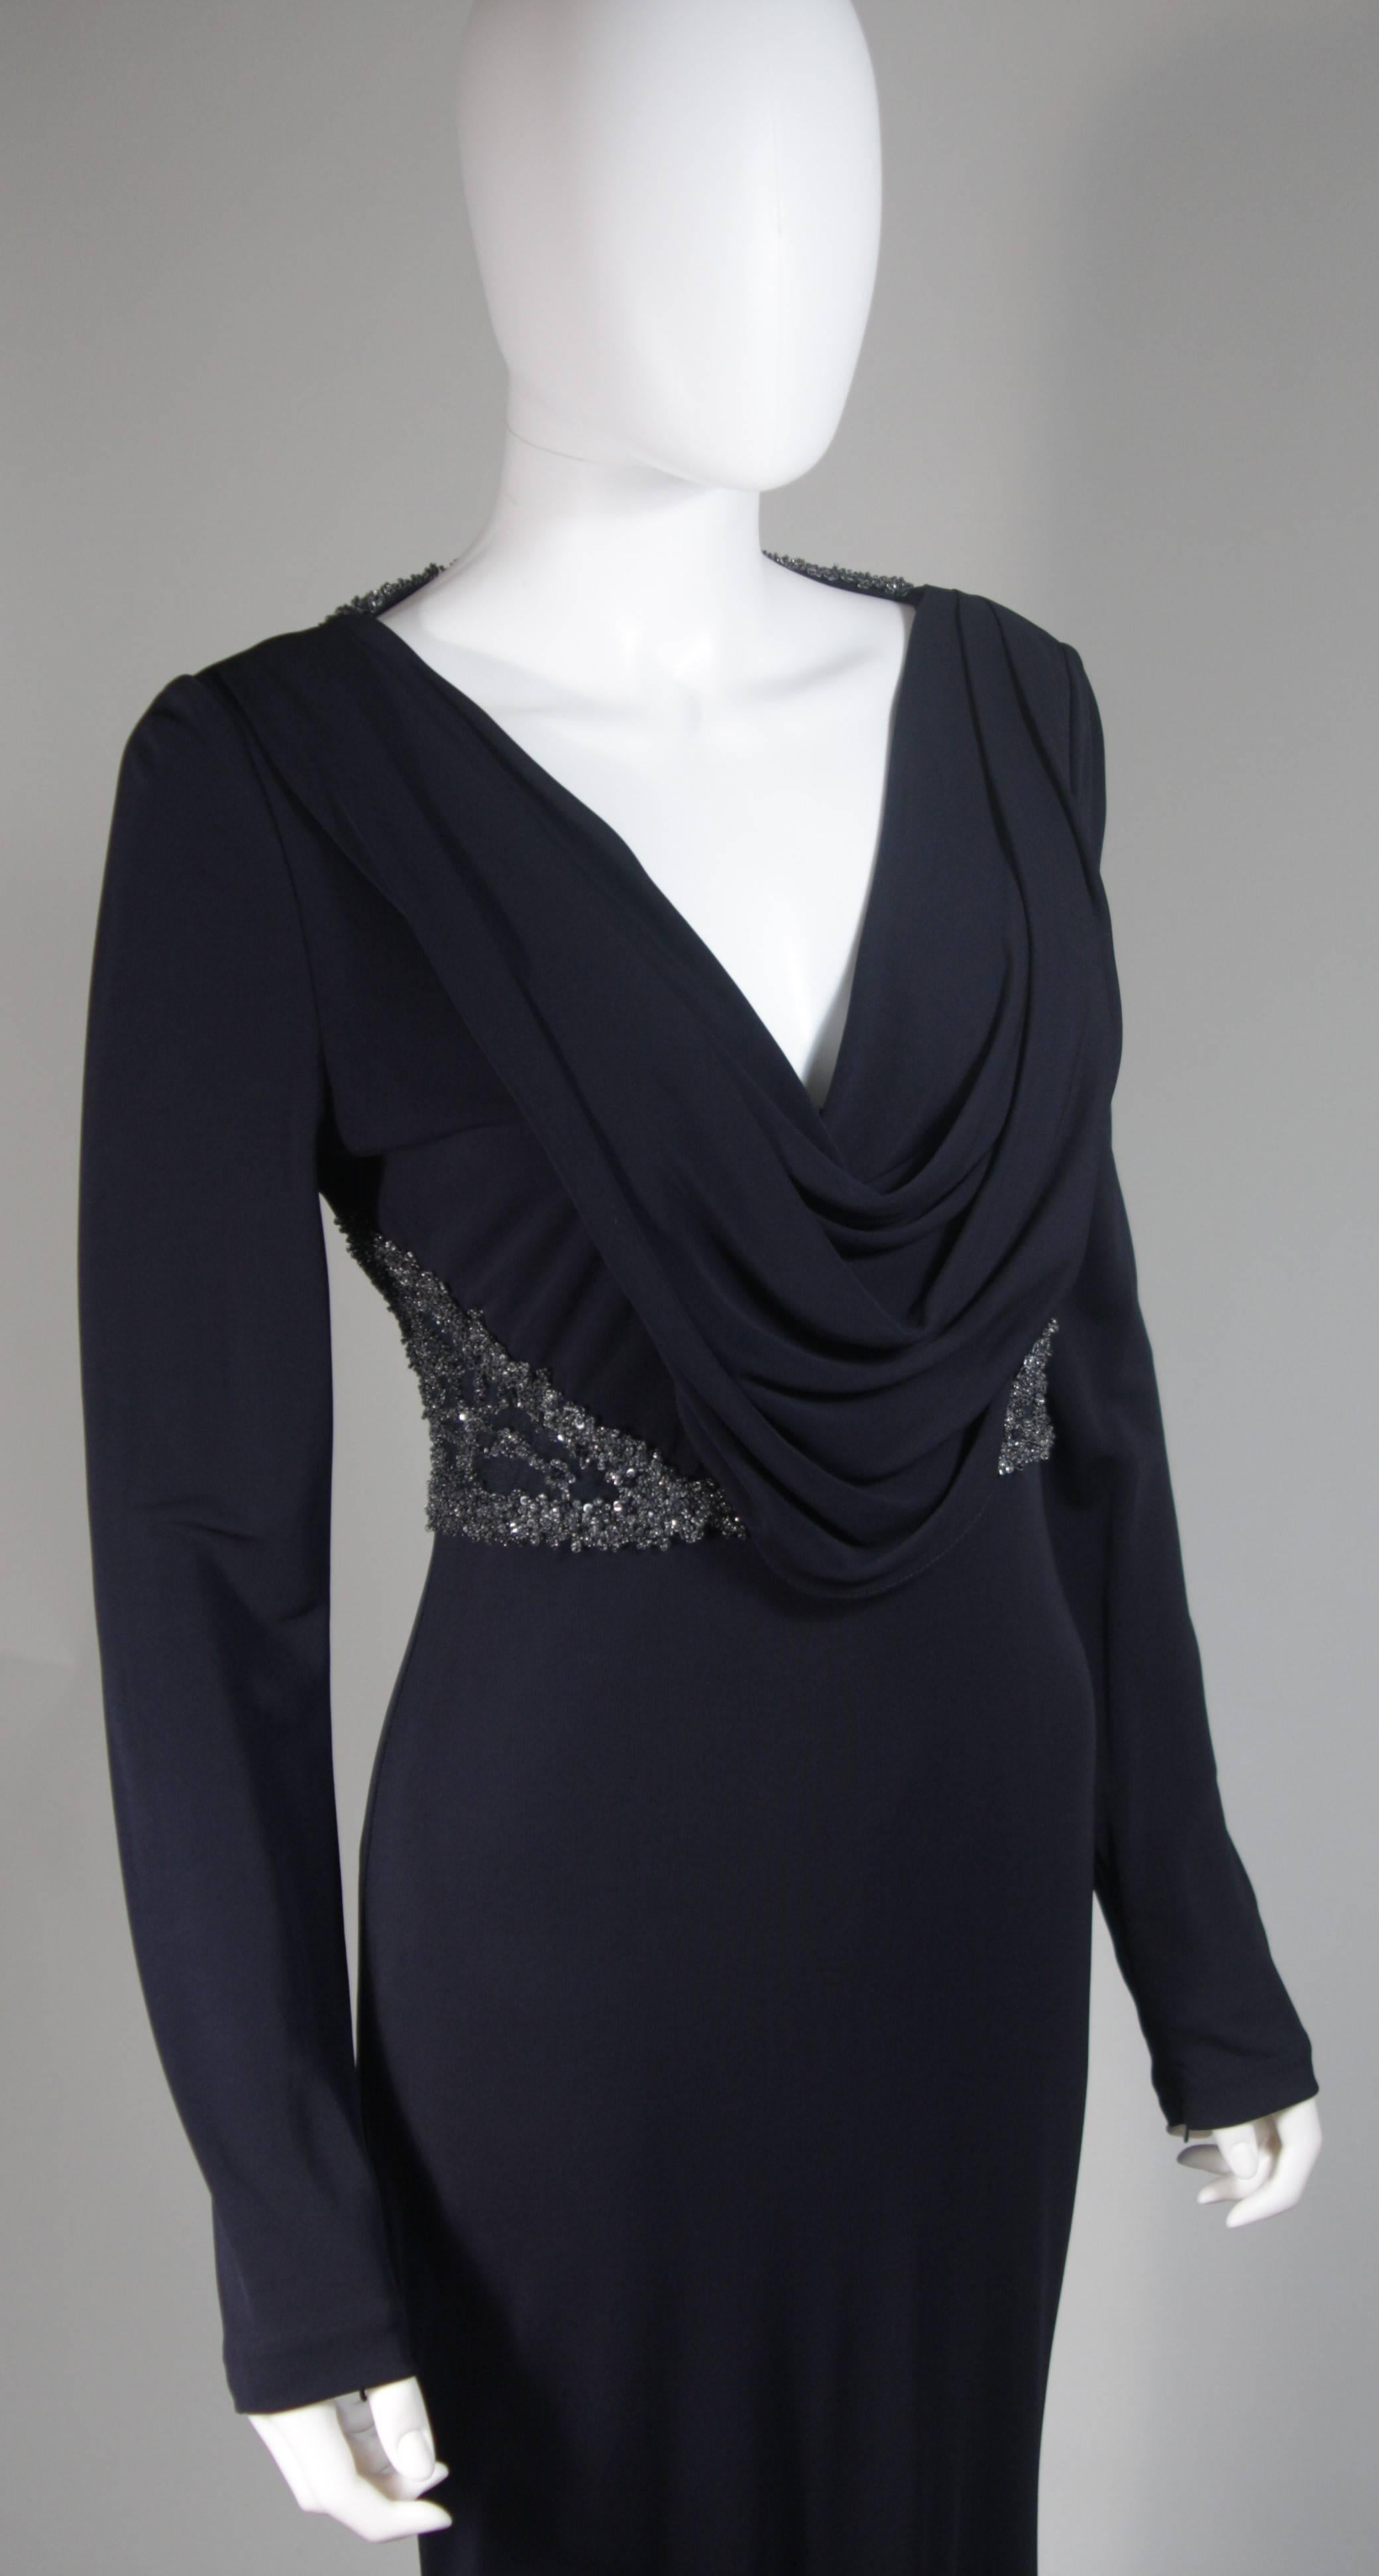 Women's BADGLEY MISCHKA Navy Draped Stretch Jersey Gown with Side Embellishment Size 6